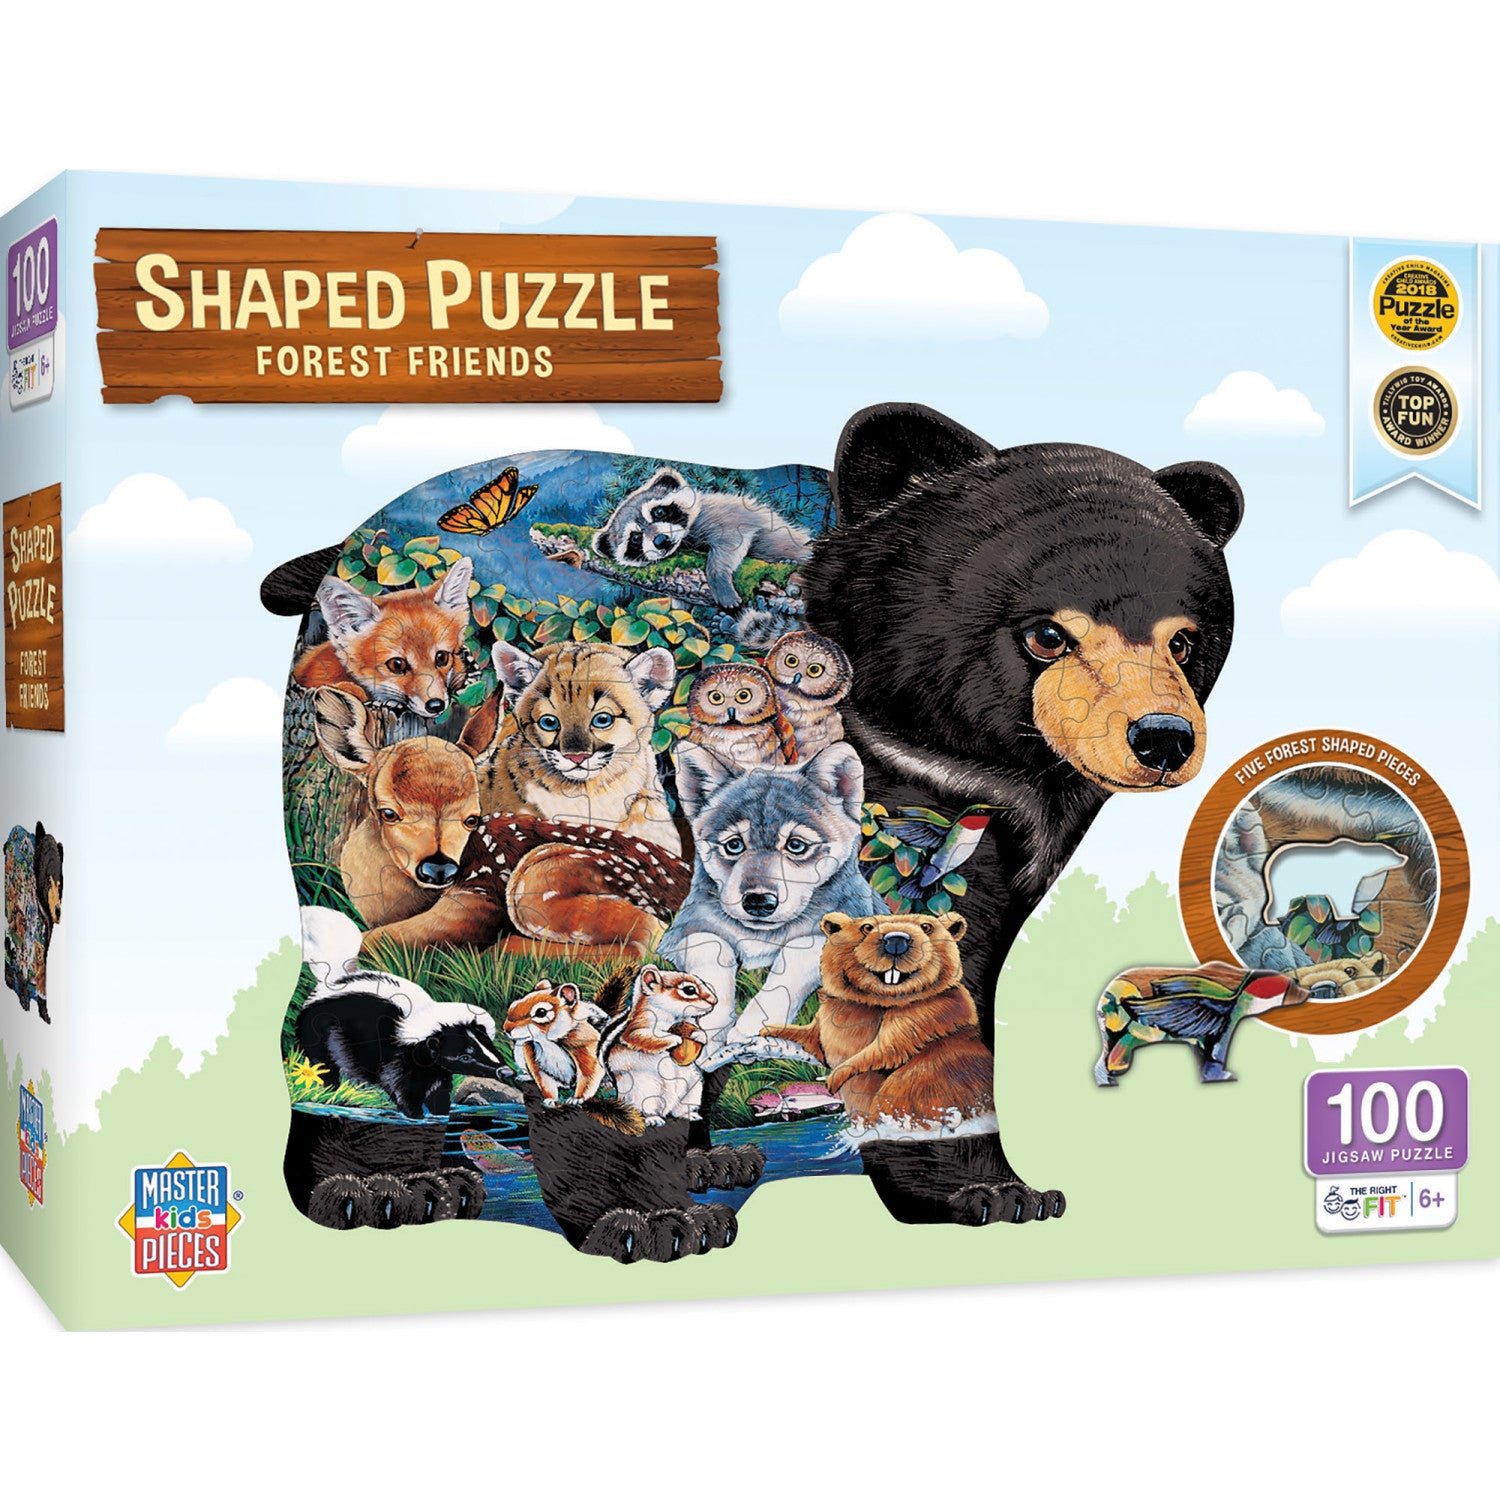 Forest Friends - 100 Piece Shaped Jigsaw Puzzle